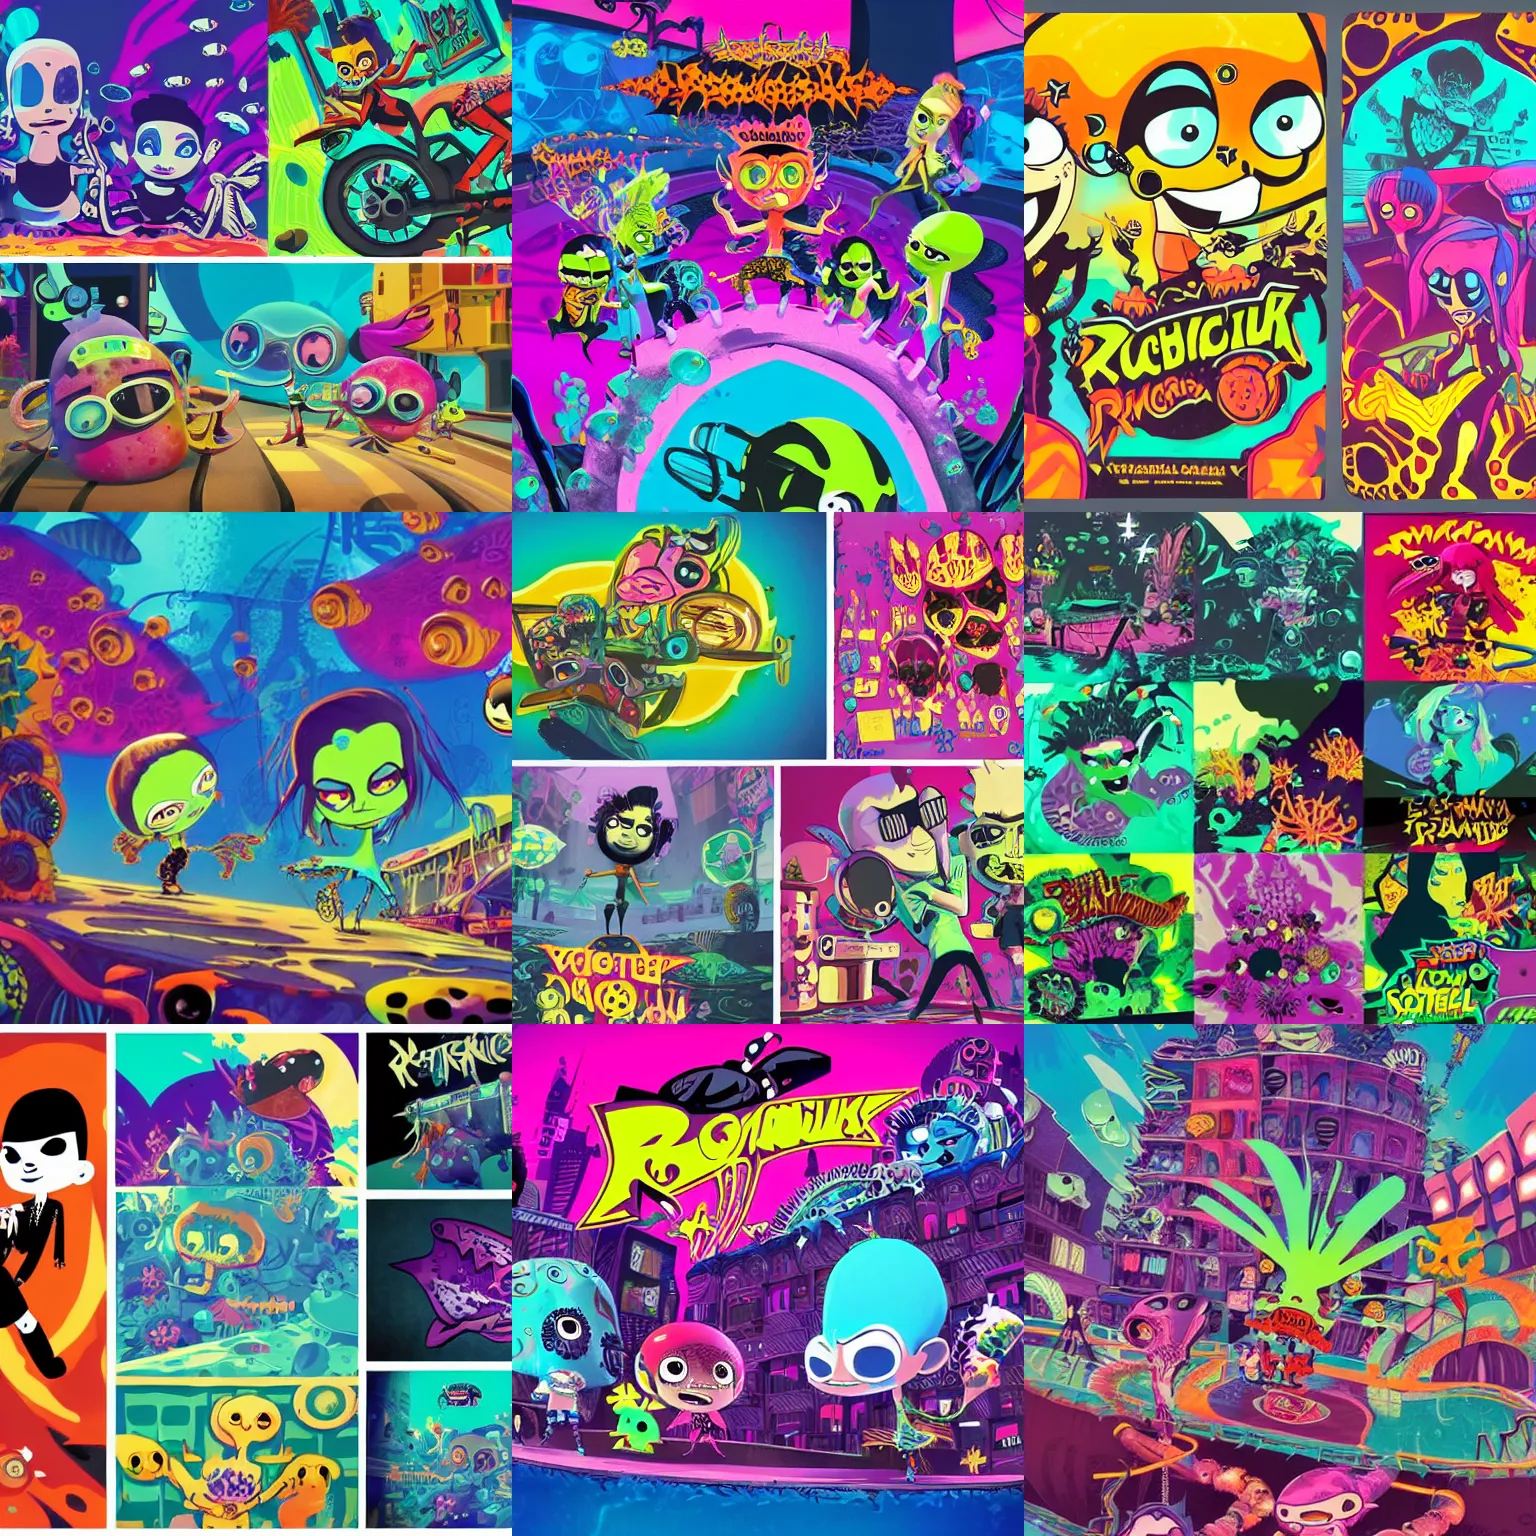 Prompt: psychic punk rocker vampiric electrifying rockstar background designs of vibrant underwater locations filled with fish and coral and graffitti stickers by genndy tartakovsky and splatoon by nintendo and the psychonauts franchise by doublefine tim shafer artists for the new hotel transylvania film